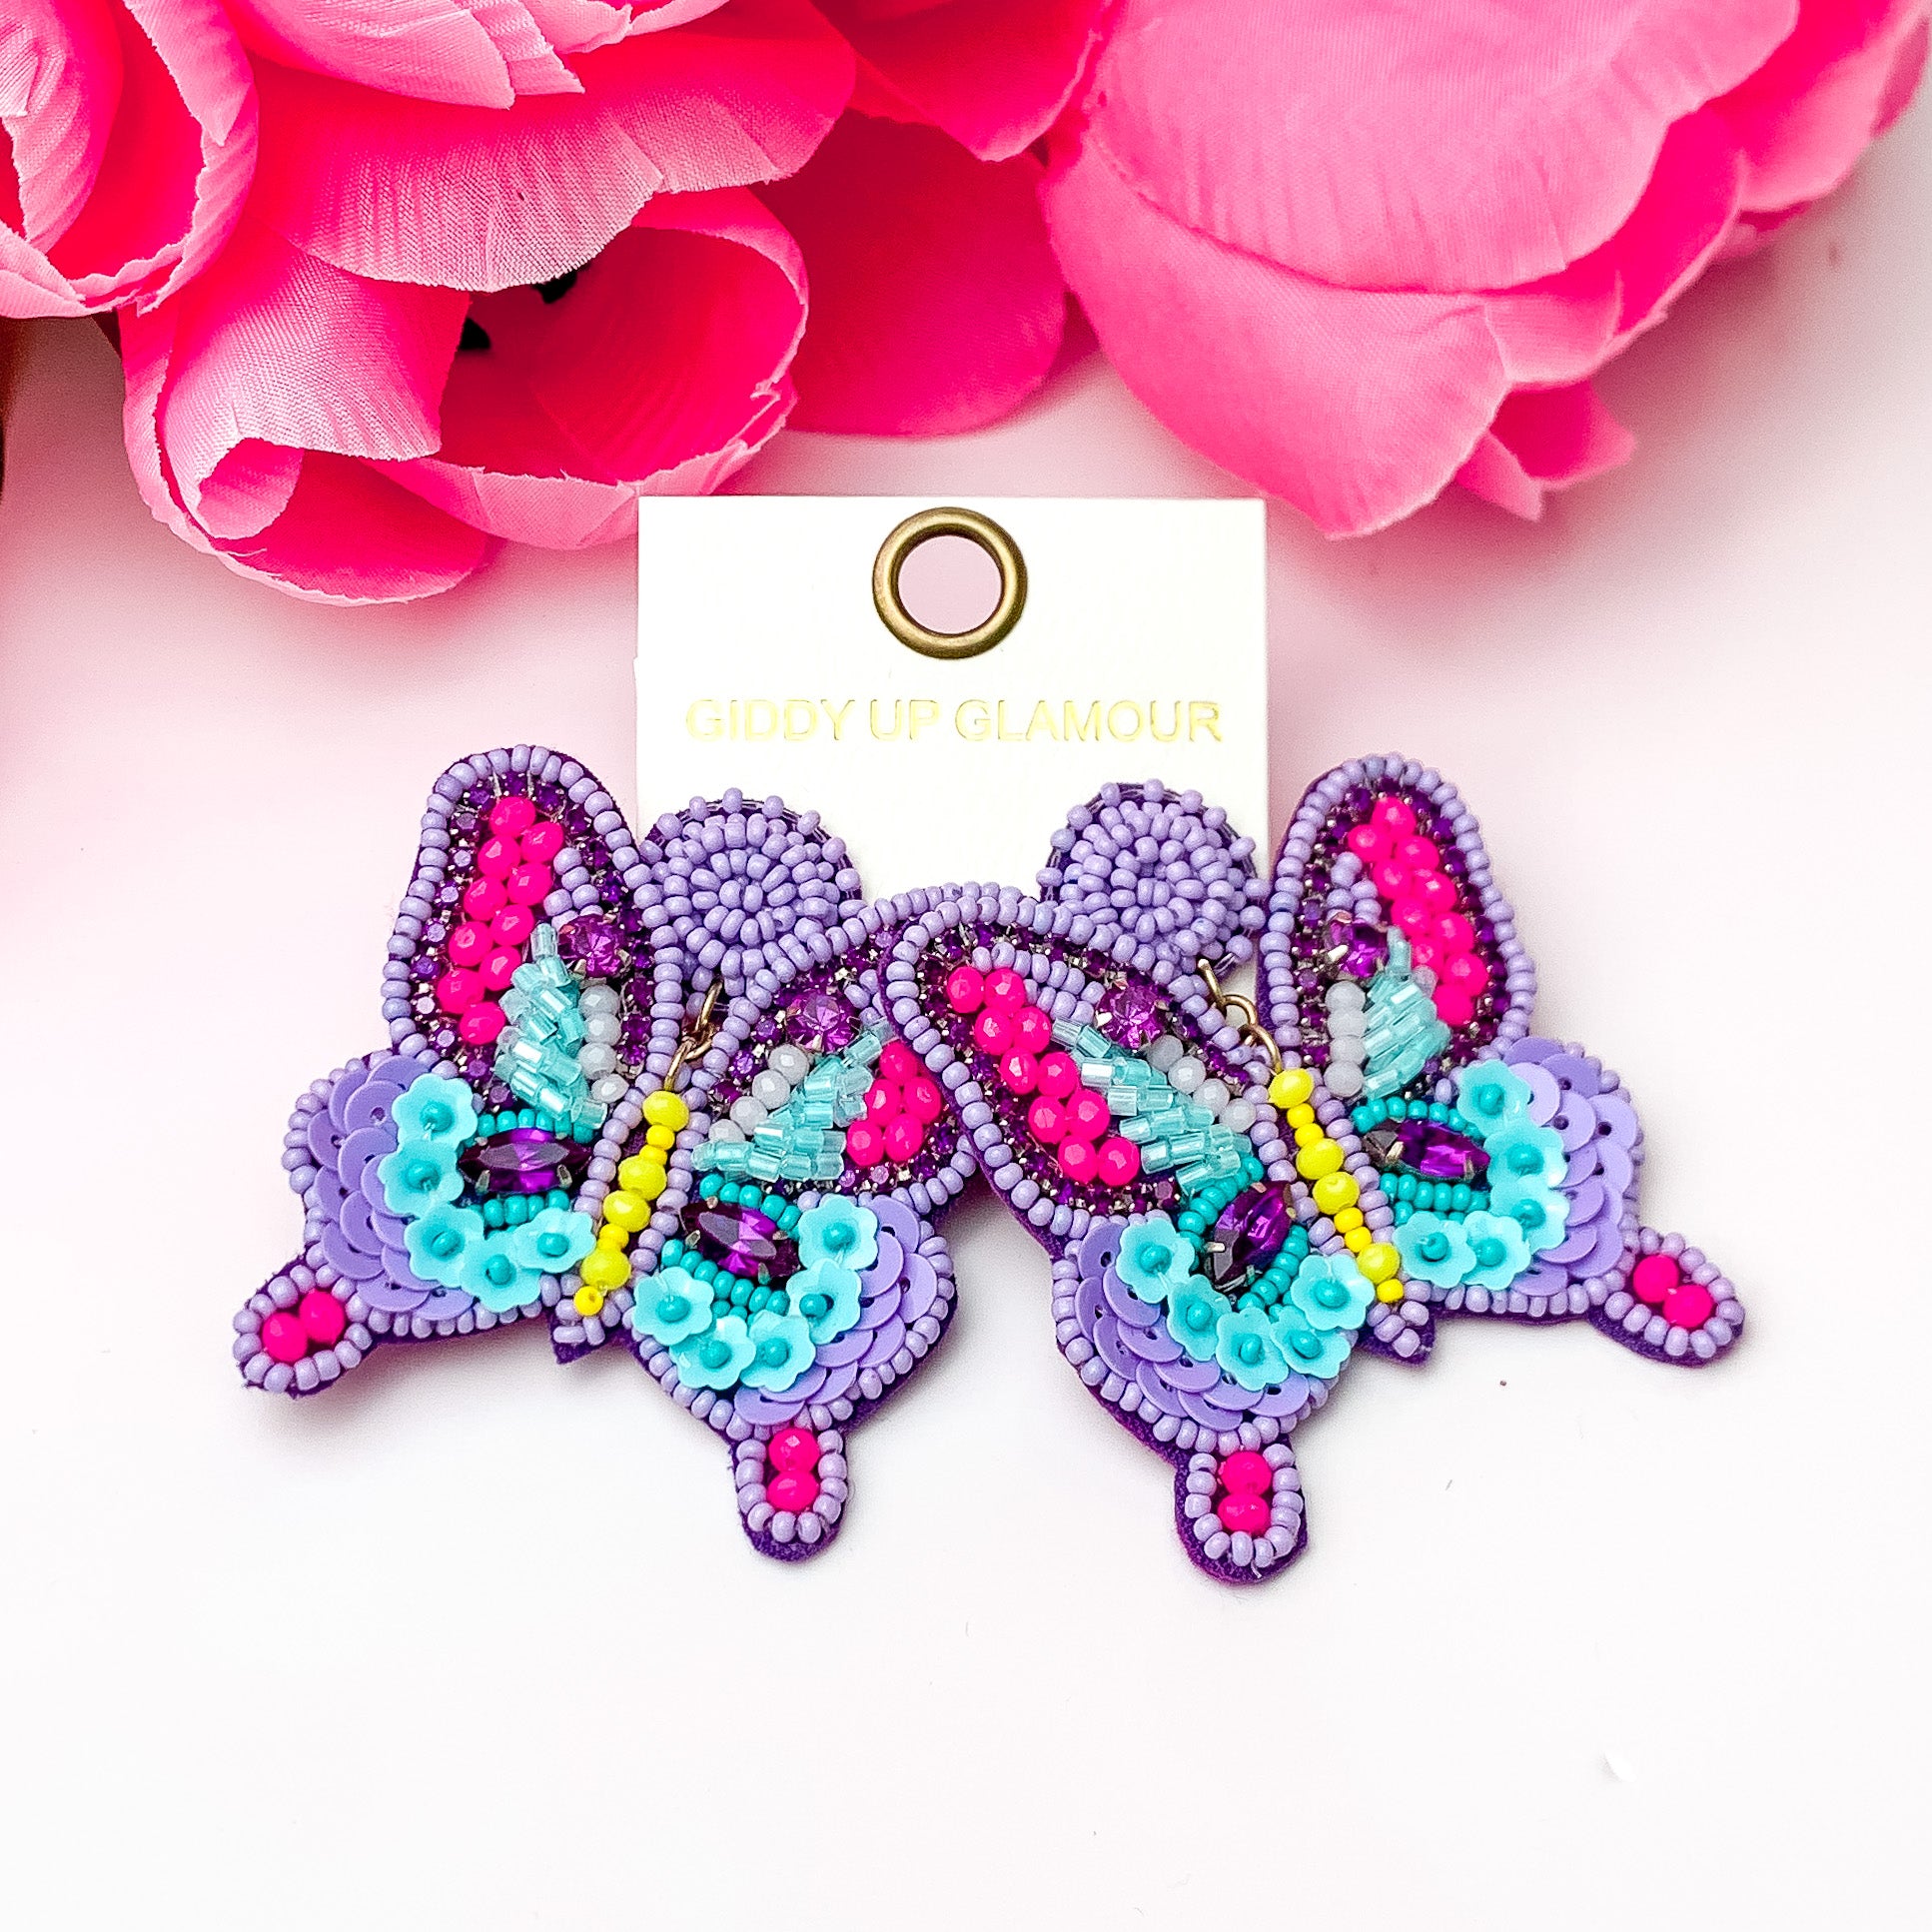 Purple beaded butterfly earrings. Pictured on a white background with pink flowers at the top.